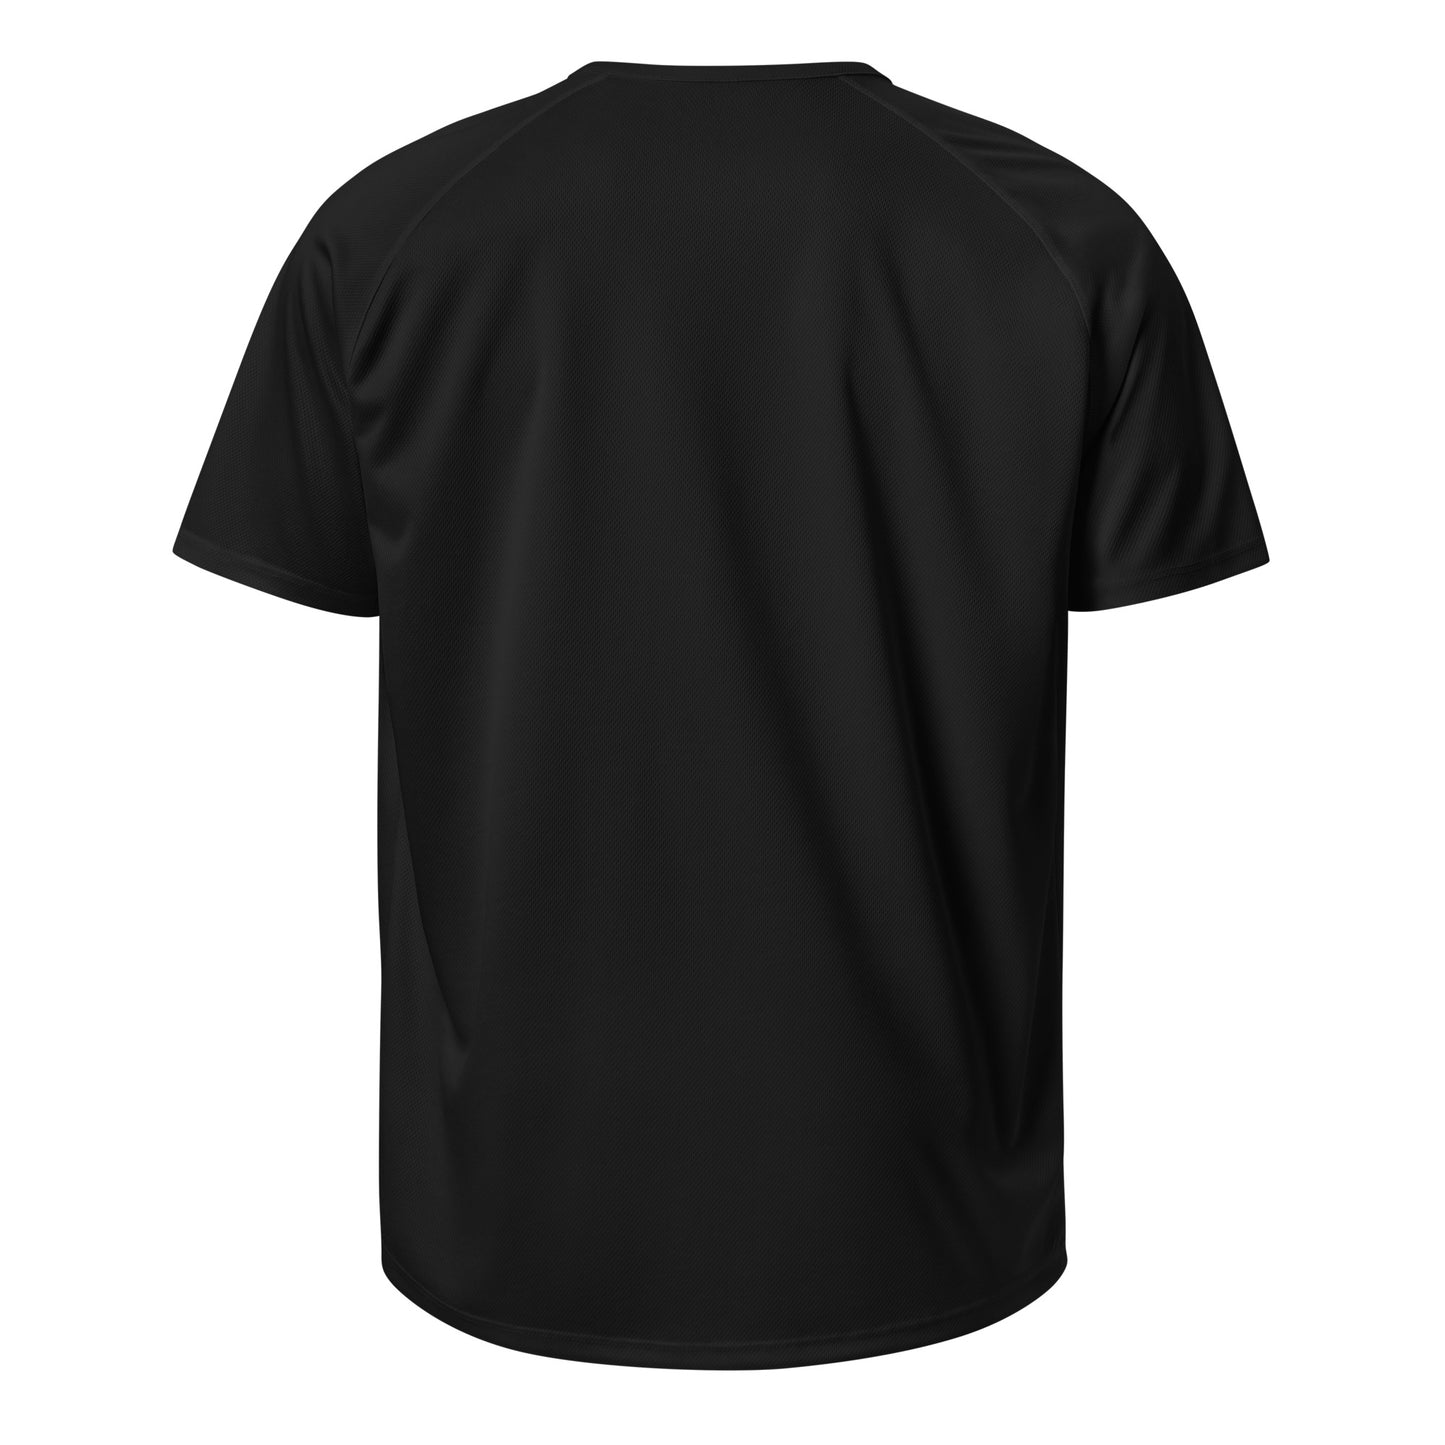 Unisex sports jersey - Young Gifted and Black